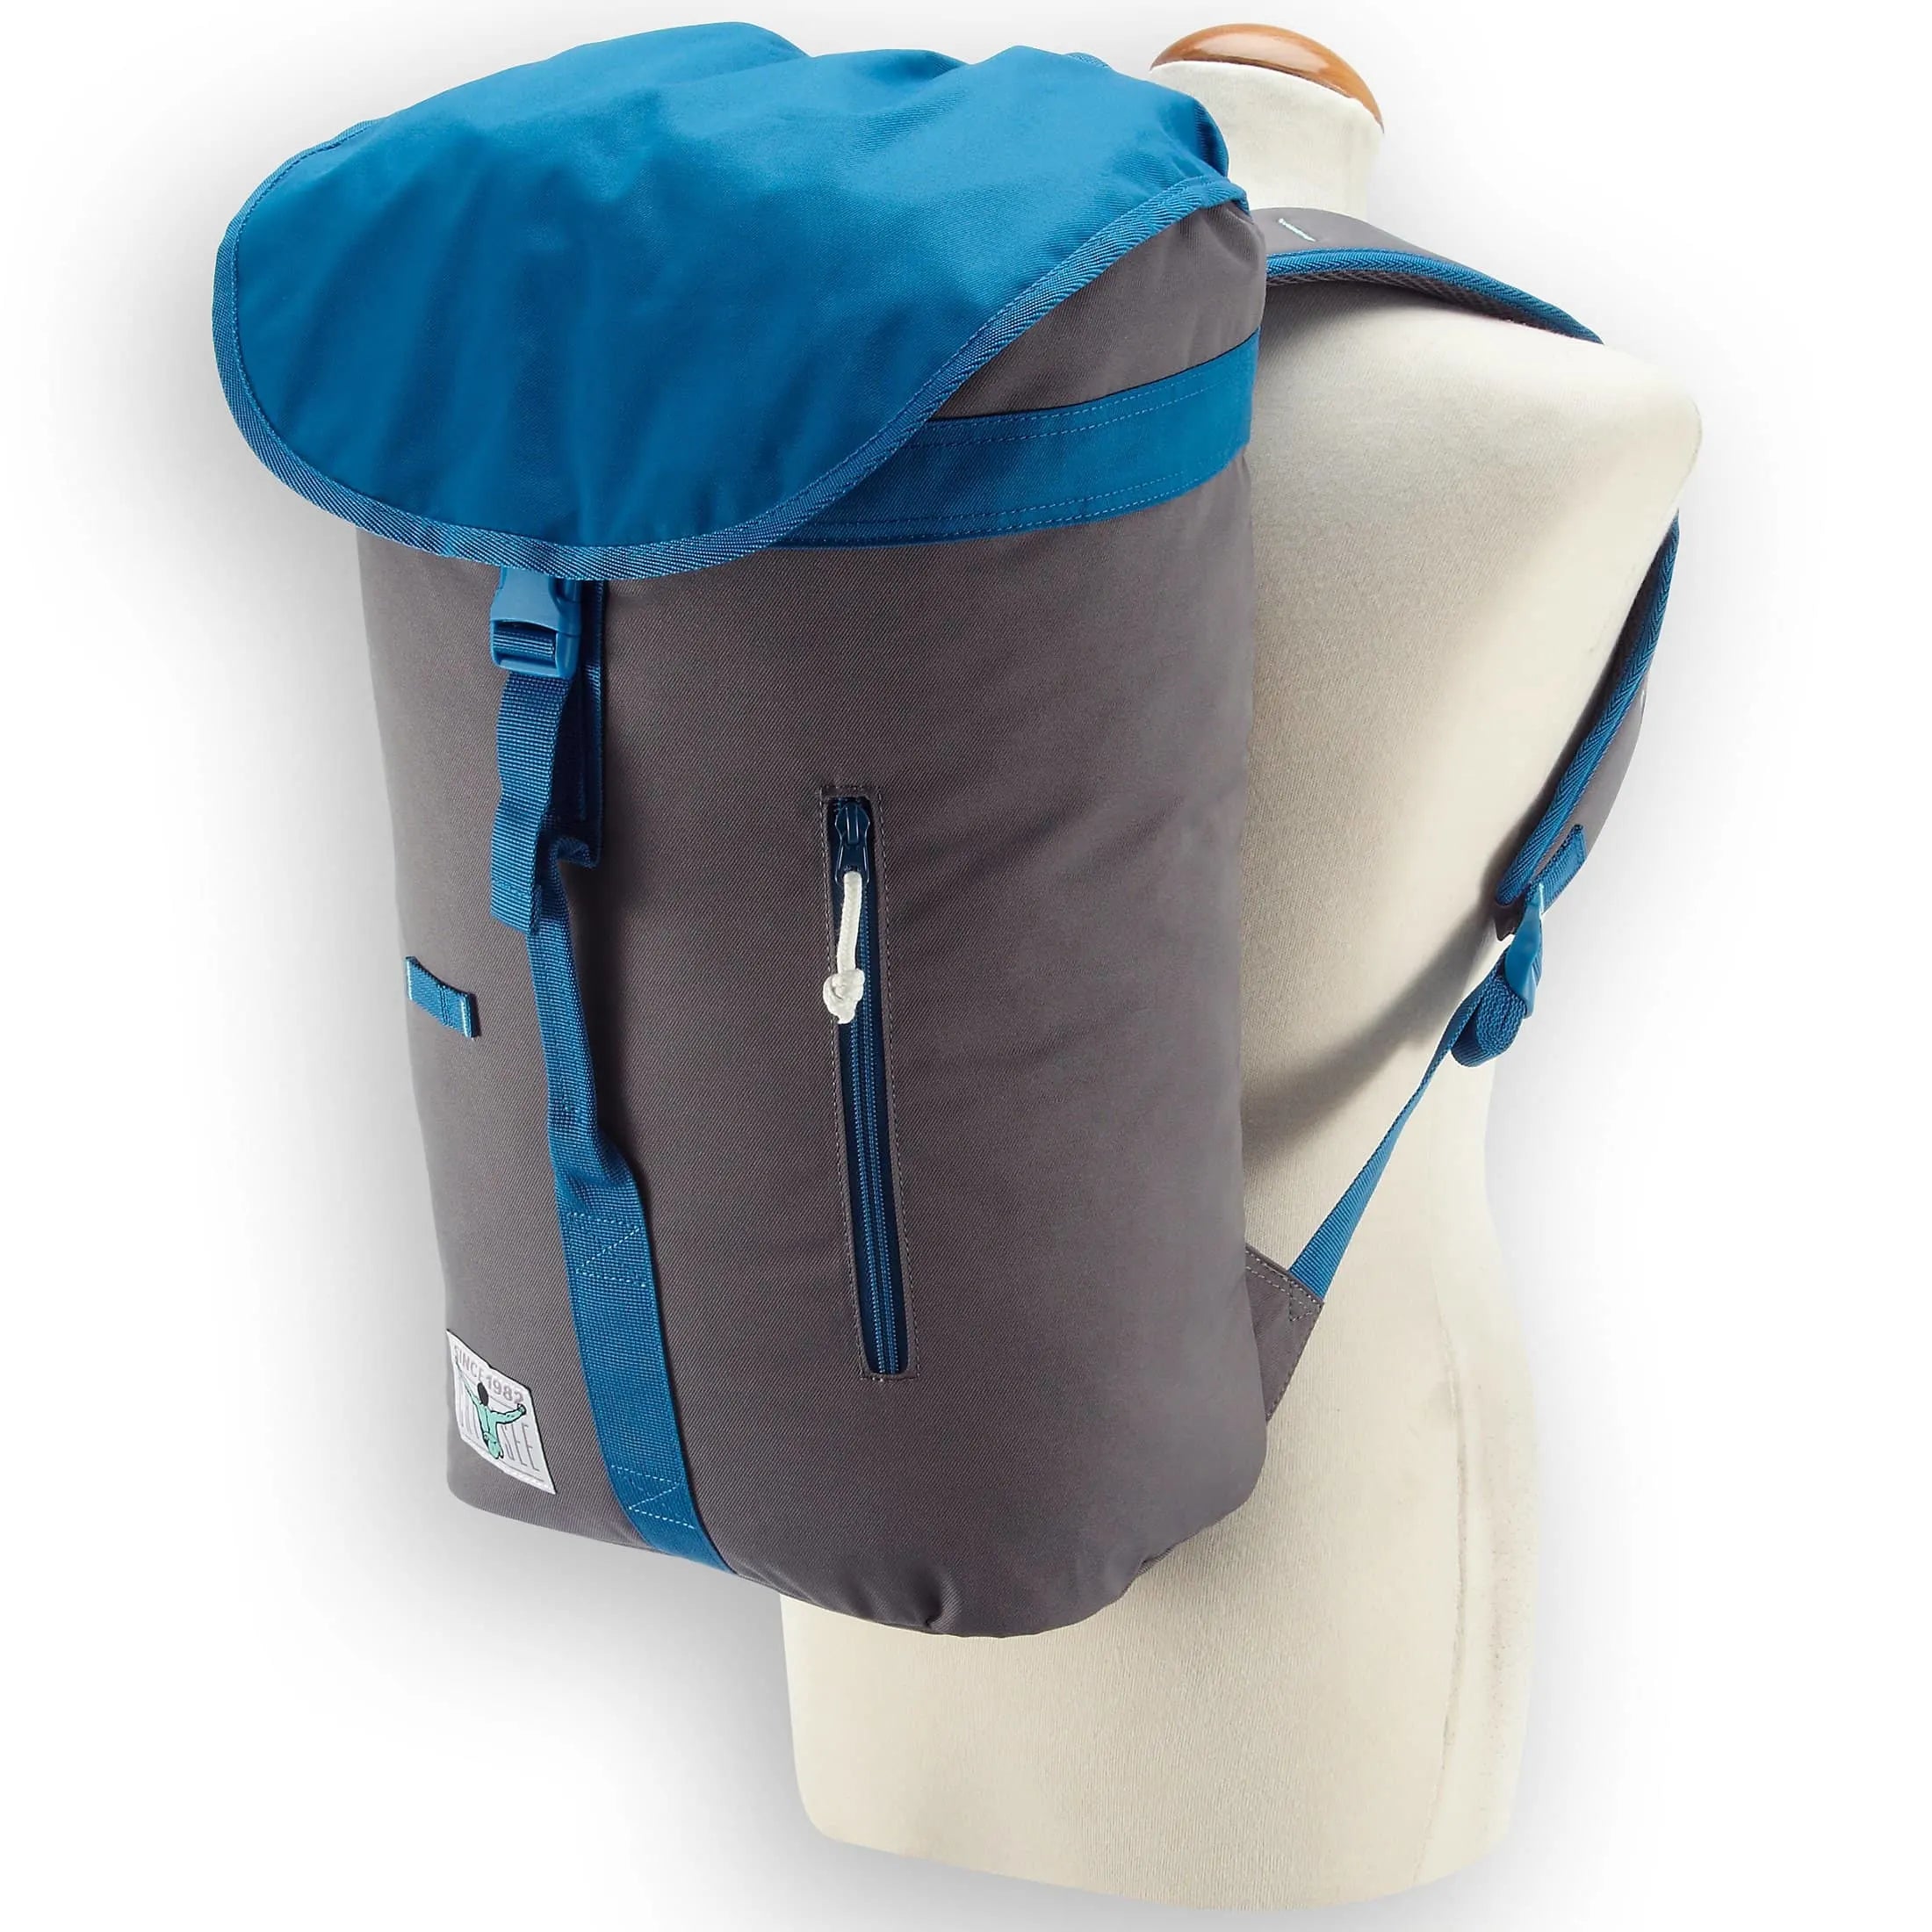 Chiemsee Urban Explorer Oslo backpack with laptop compartment 45 cm - excalibur blue saphire